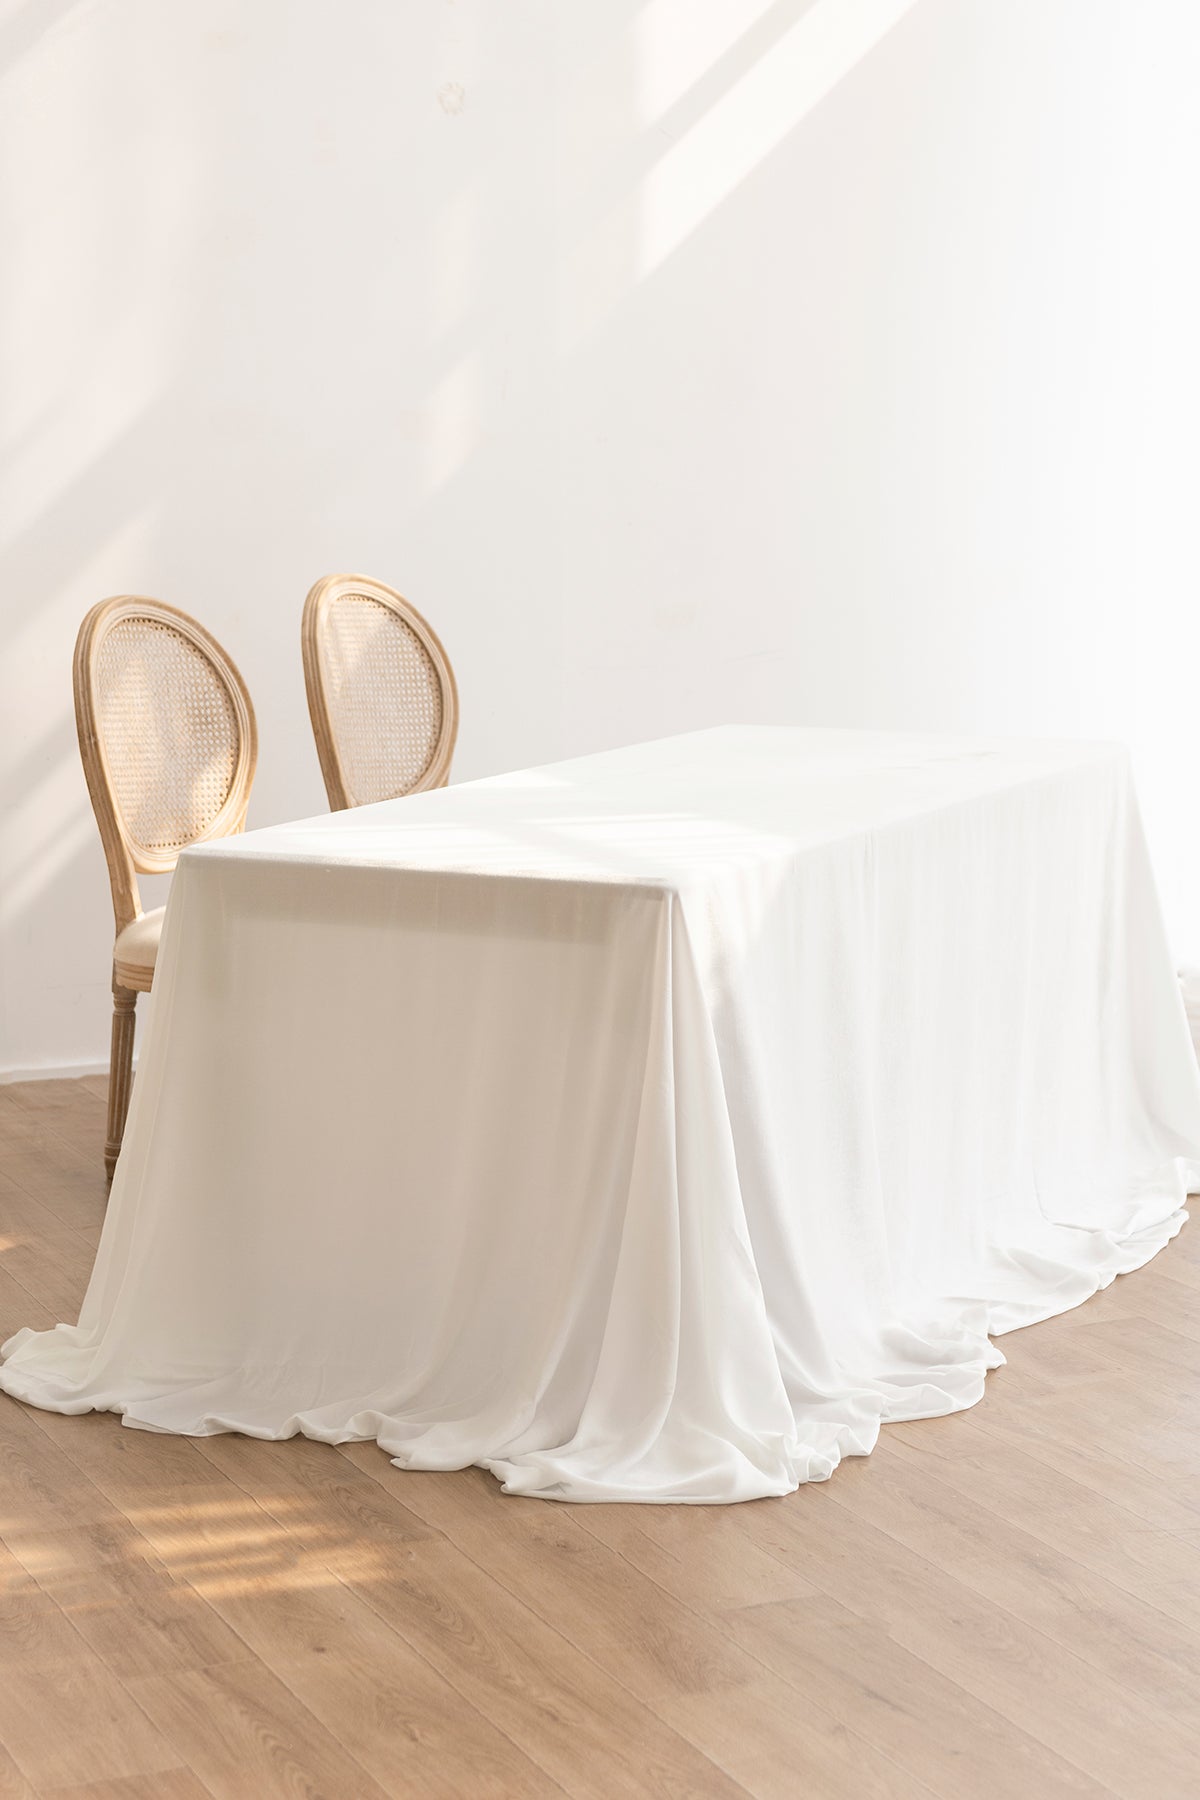 Table linens in White & Sage